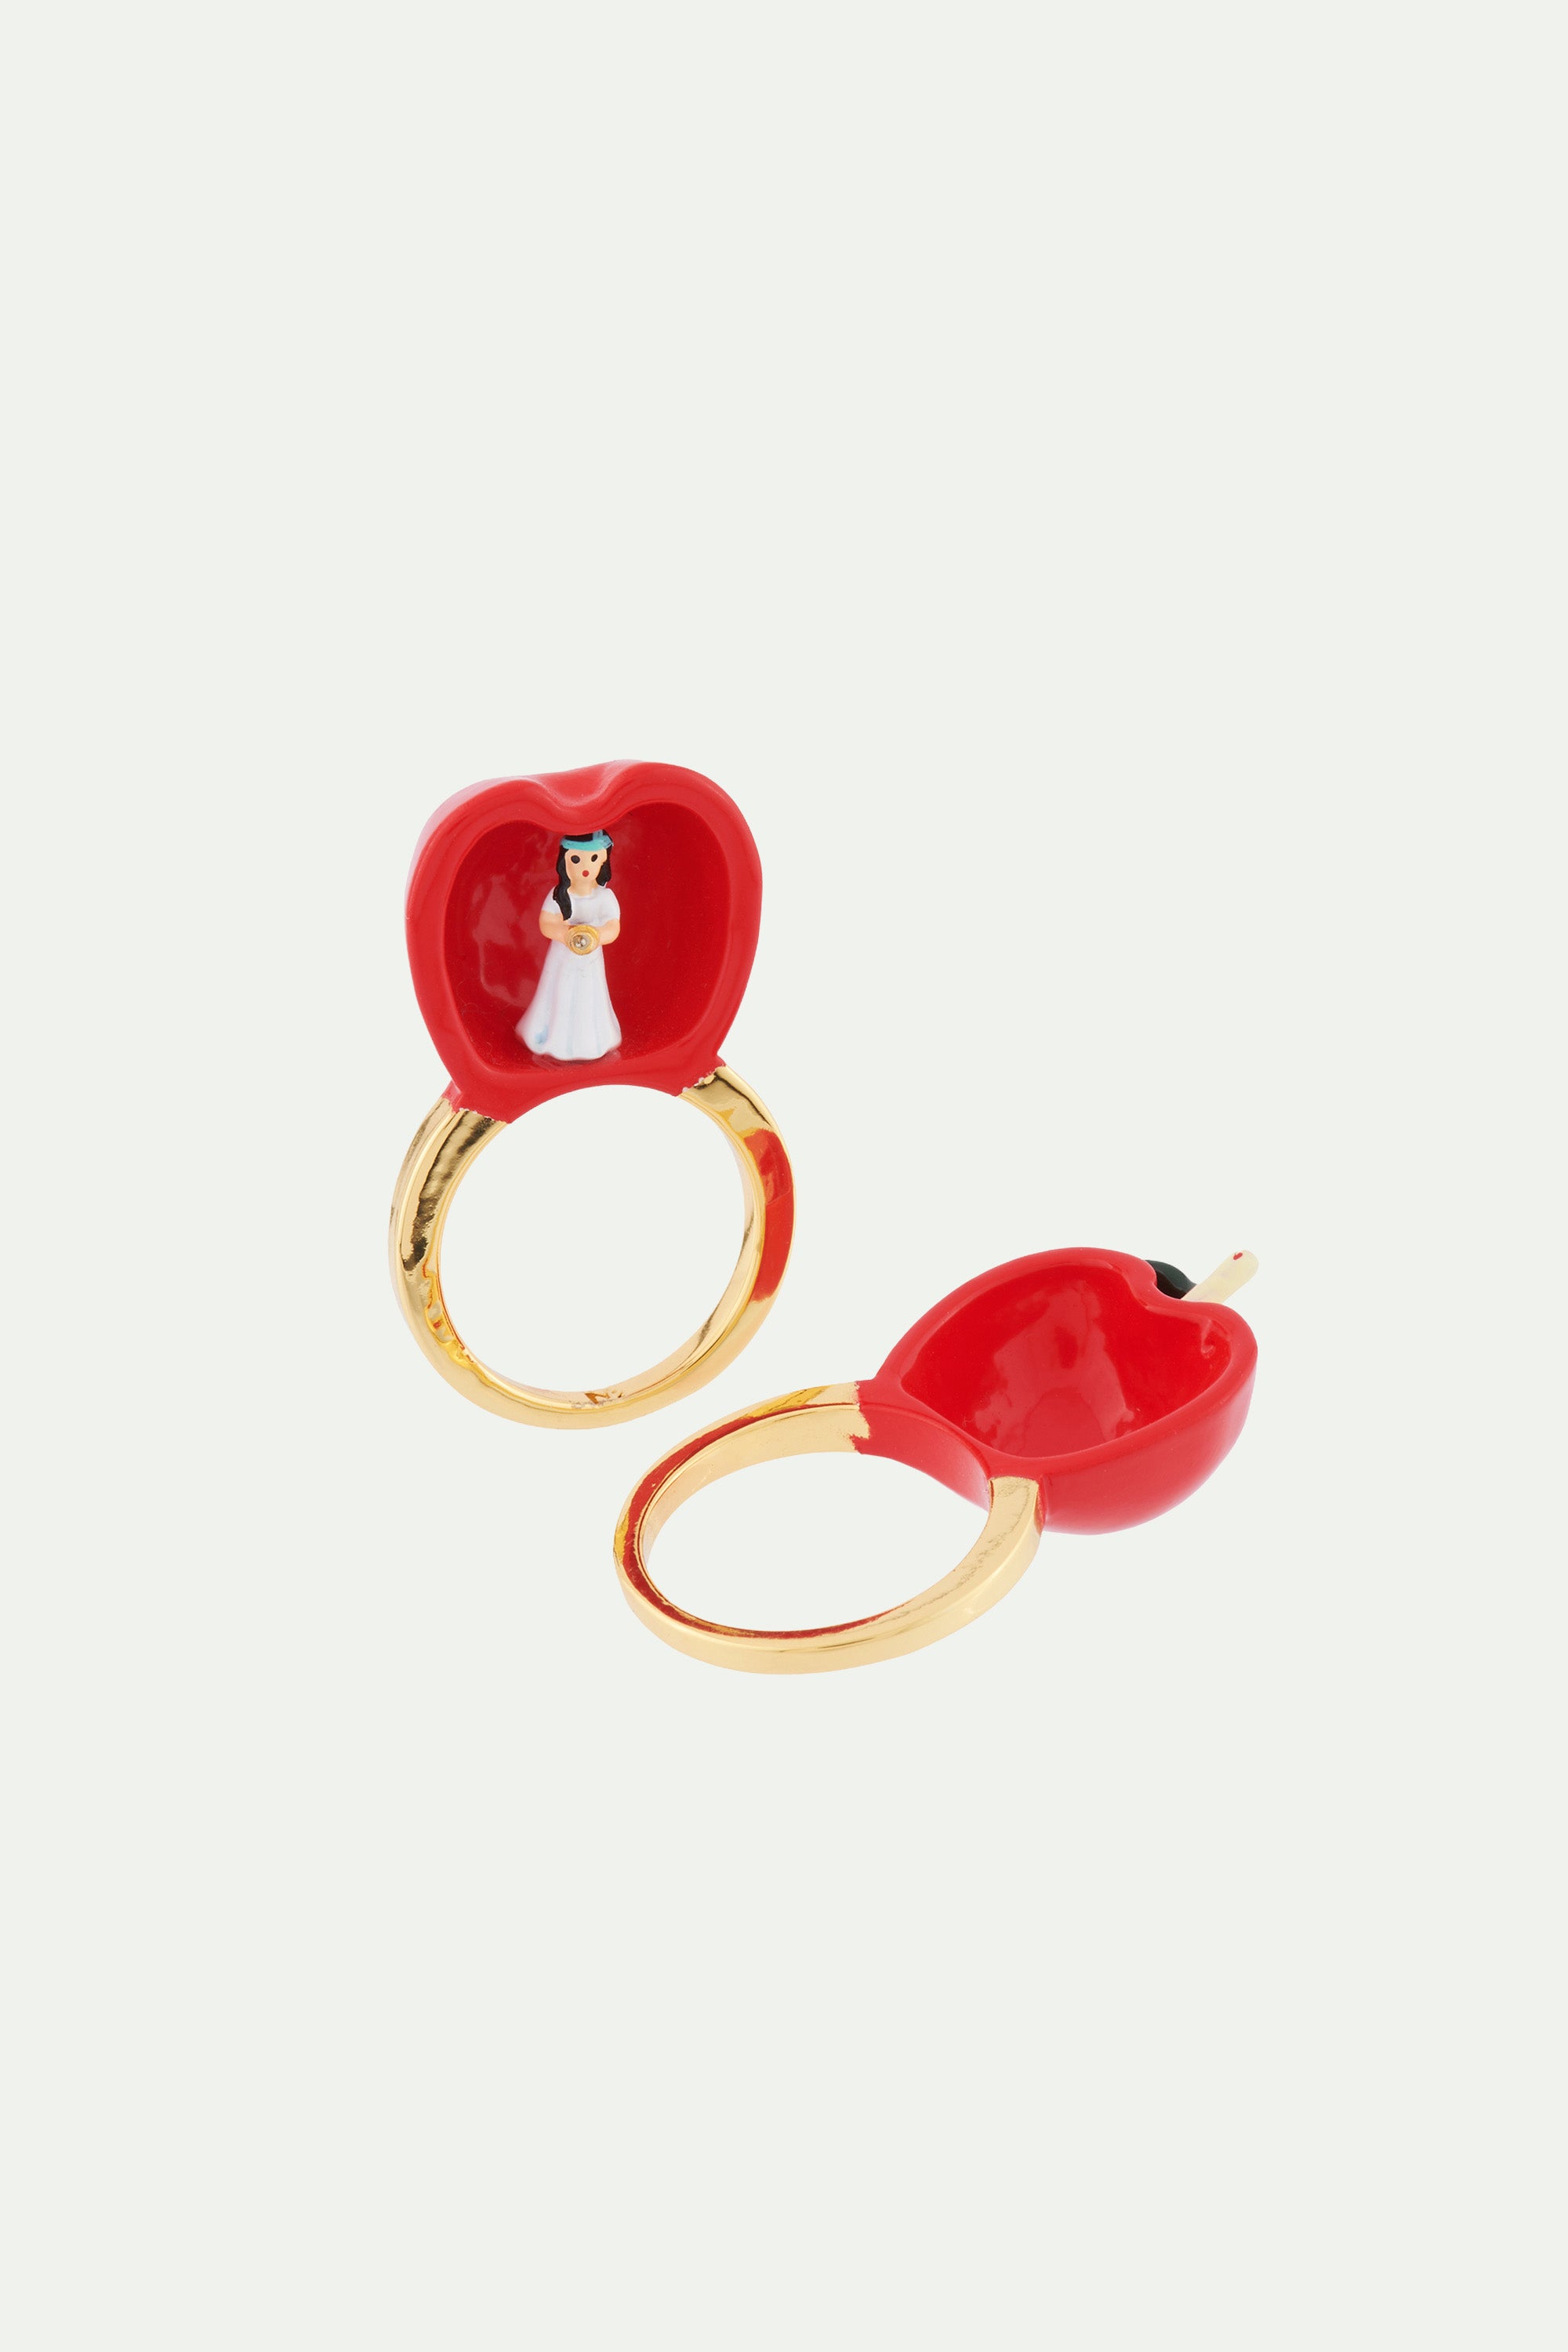 Snow White into the poison apple double band ring